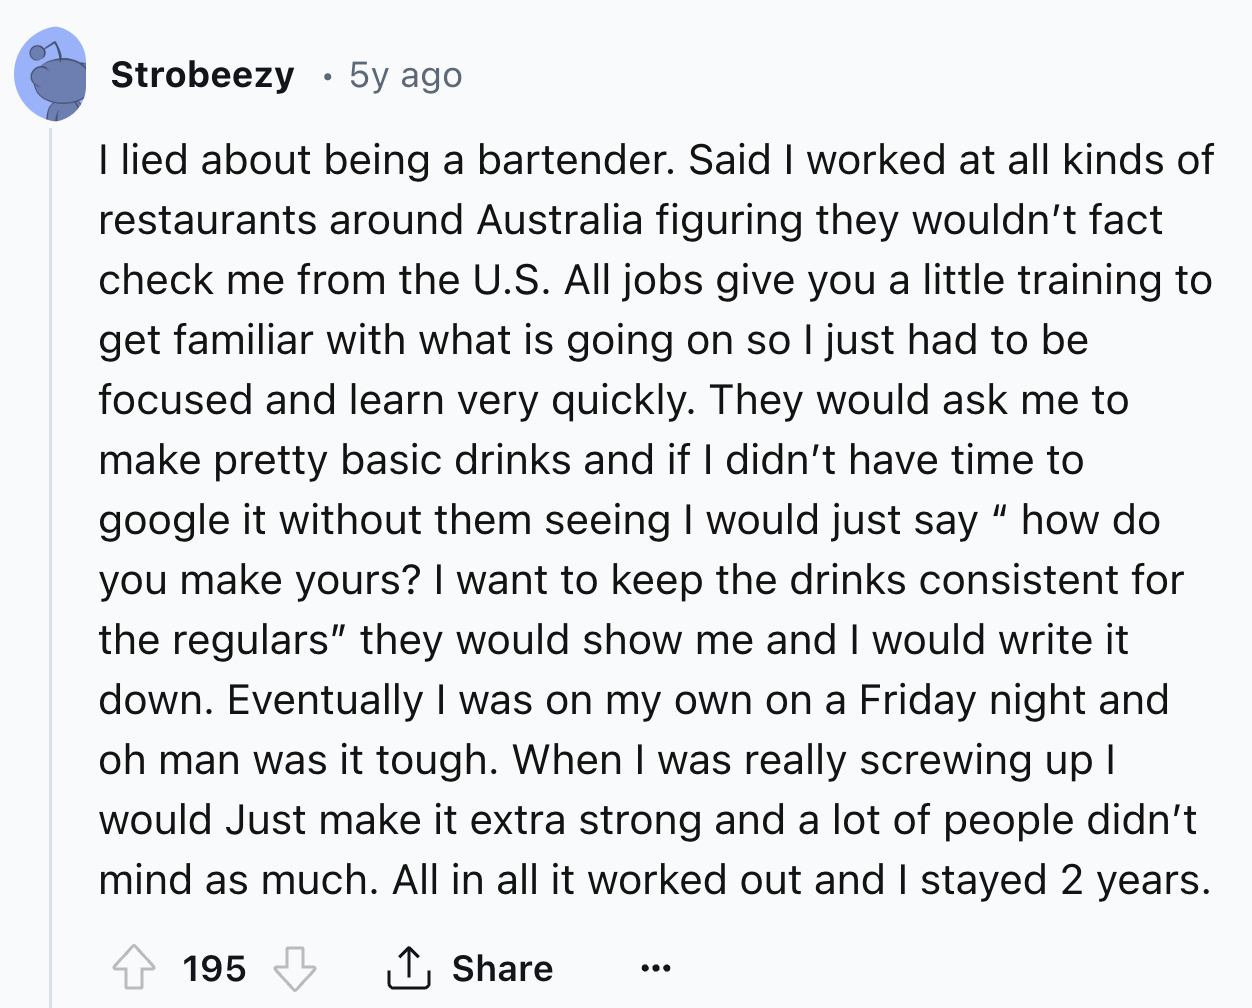 screenshot - Strobeezy 5y ago I lied about being a bartender. Said I worked at all kinds of restaurants around Australia figuring they wouldn't fact check me from the U.S. All jobs give you a little training to get familiar with what is going on so I just